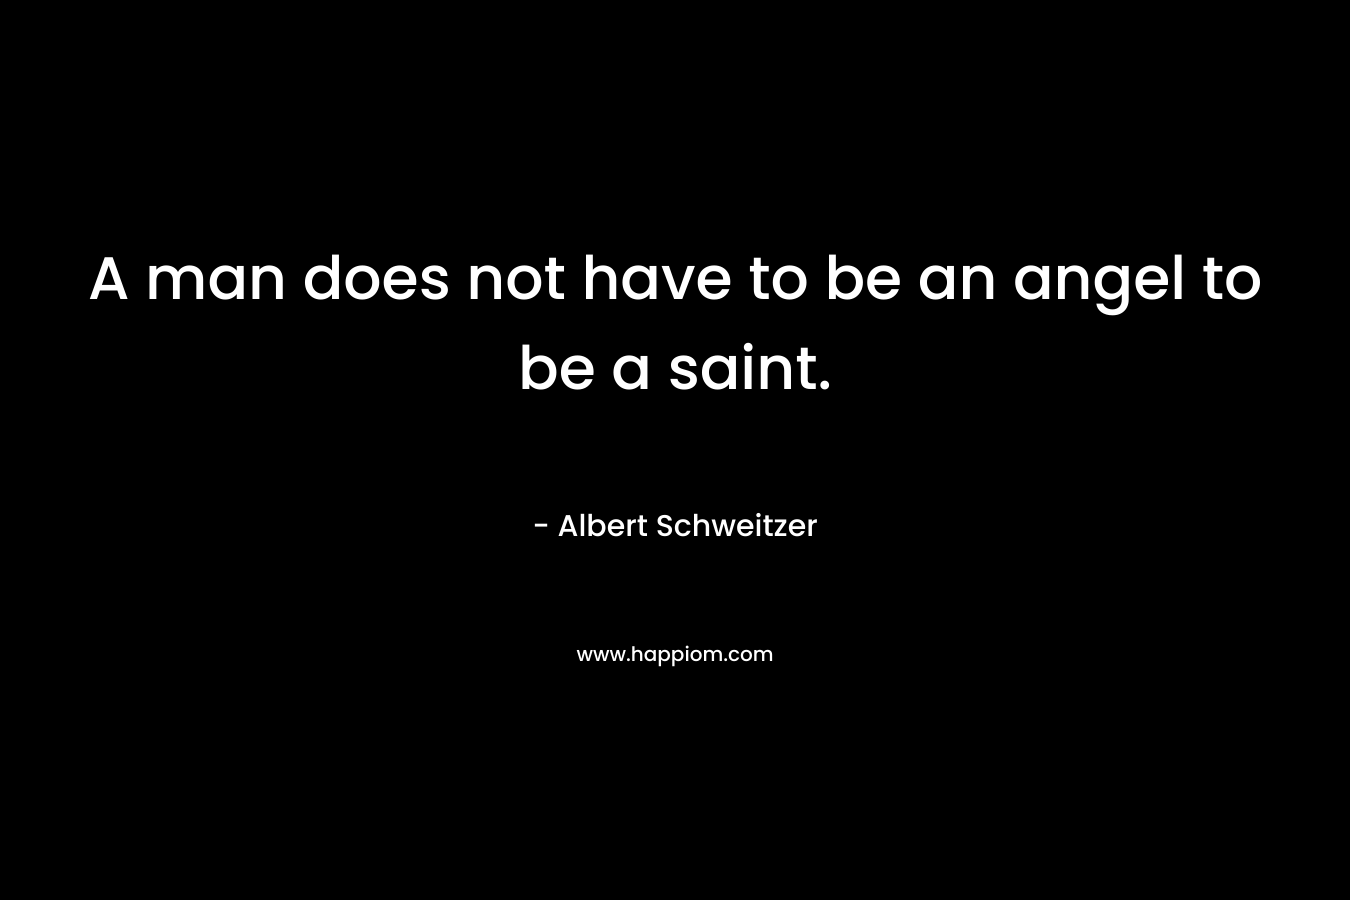 A man does not have to be an angel to be a saint.